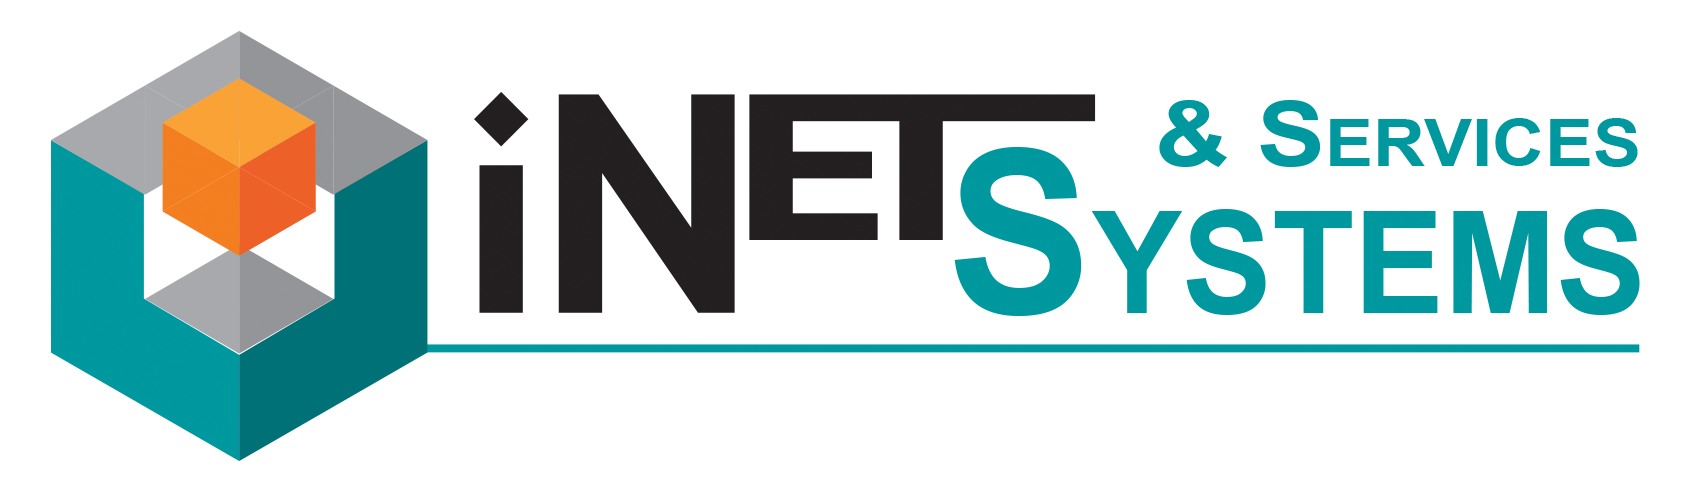 iNet Systems & Services logo